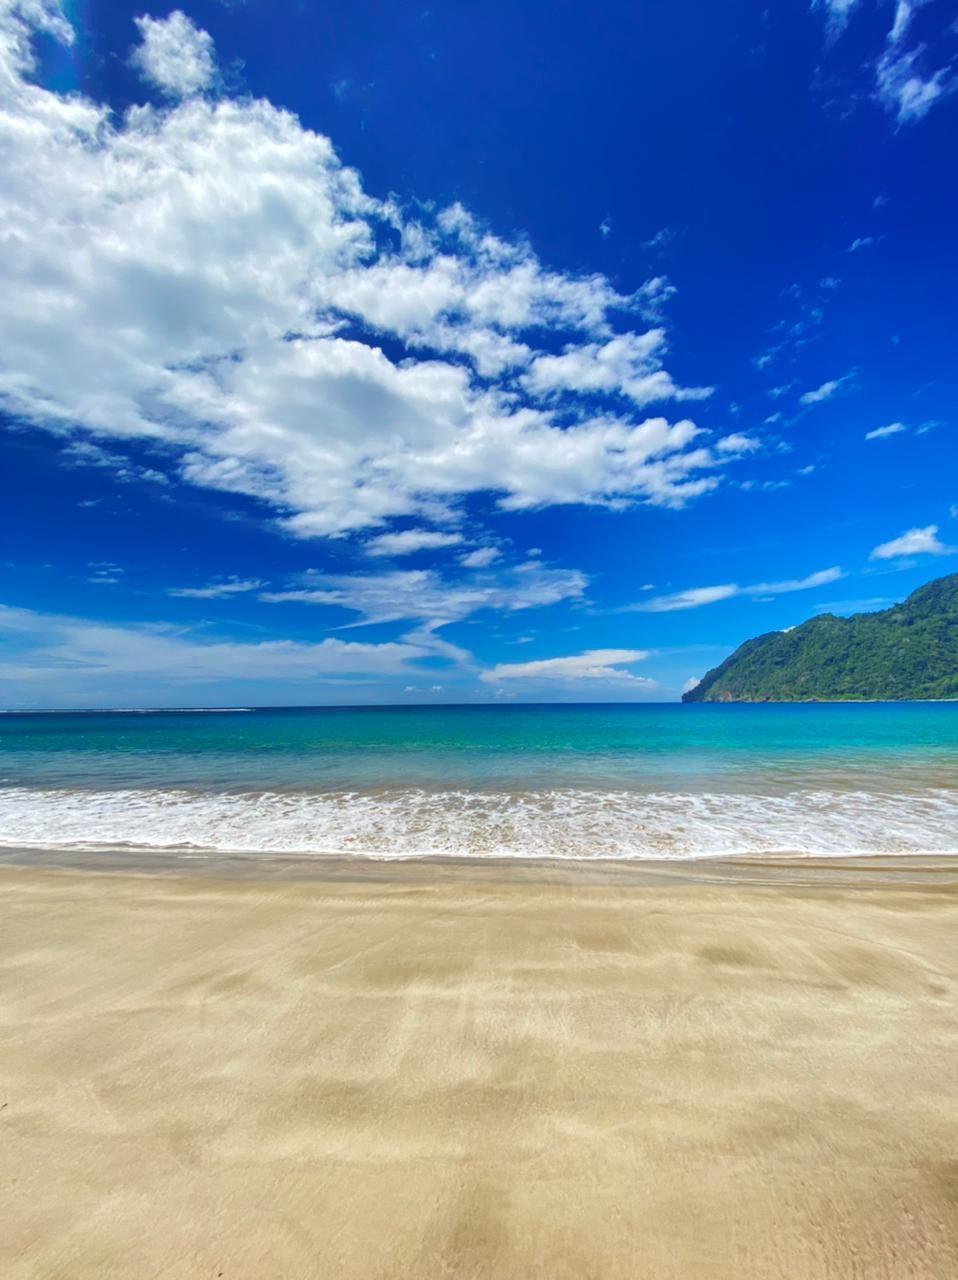 land, sea, sky, beach, water, scenics - nature, cloud, sand, beauty in nature, body of water, nature, shore, ocean, horizon, blue, environment, wind wave, travel destinations, landscape, tranquility, coast, travel, holiday, tranquil scene, trip, horizon over water, vacation, wave, summer, water's edge, tropical climate, no people, tourism, coastline, outdoors, idyllic, seascape, day, motion, island, water sports, sunlight, cloudscape, sports, sunny, bay